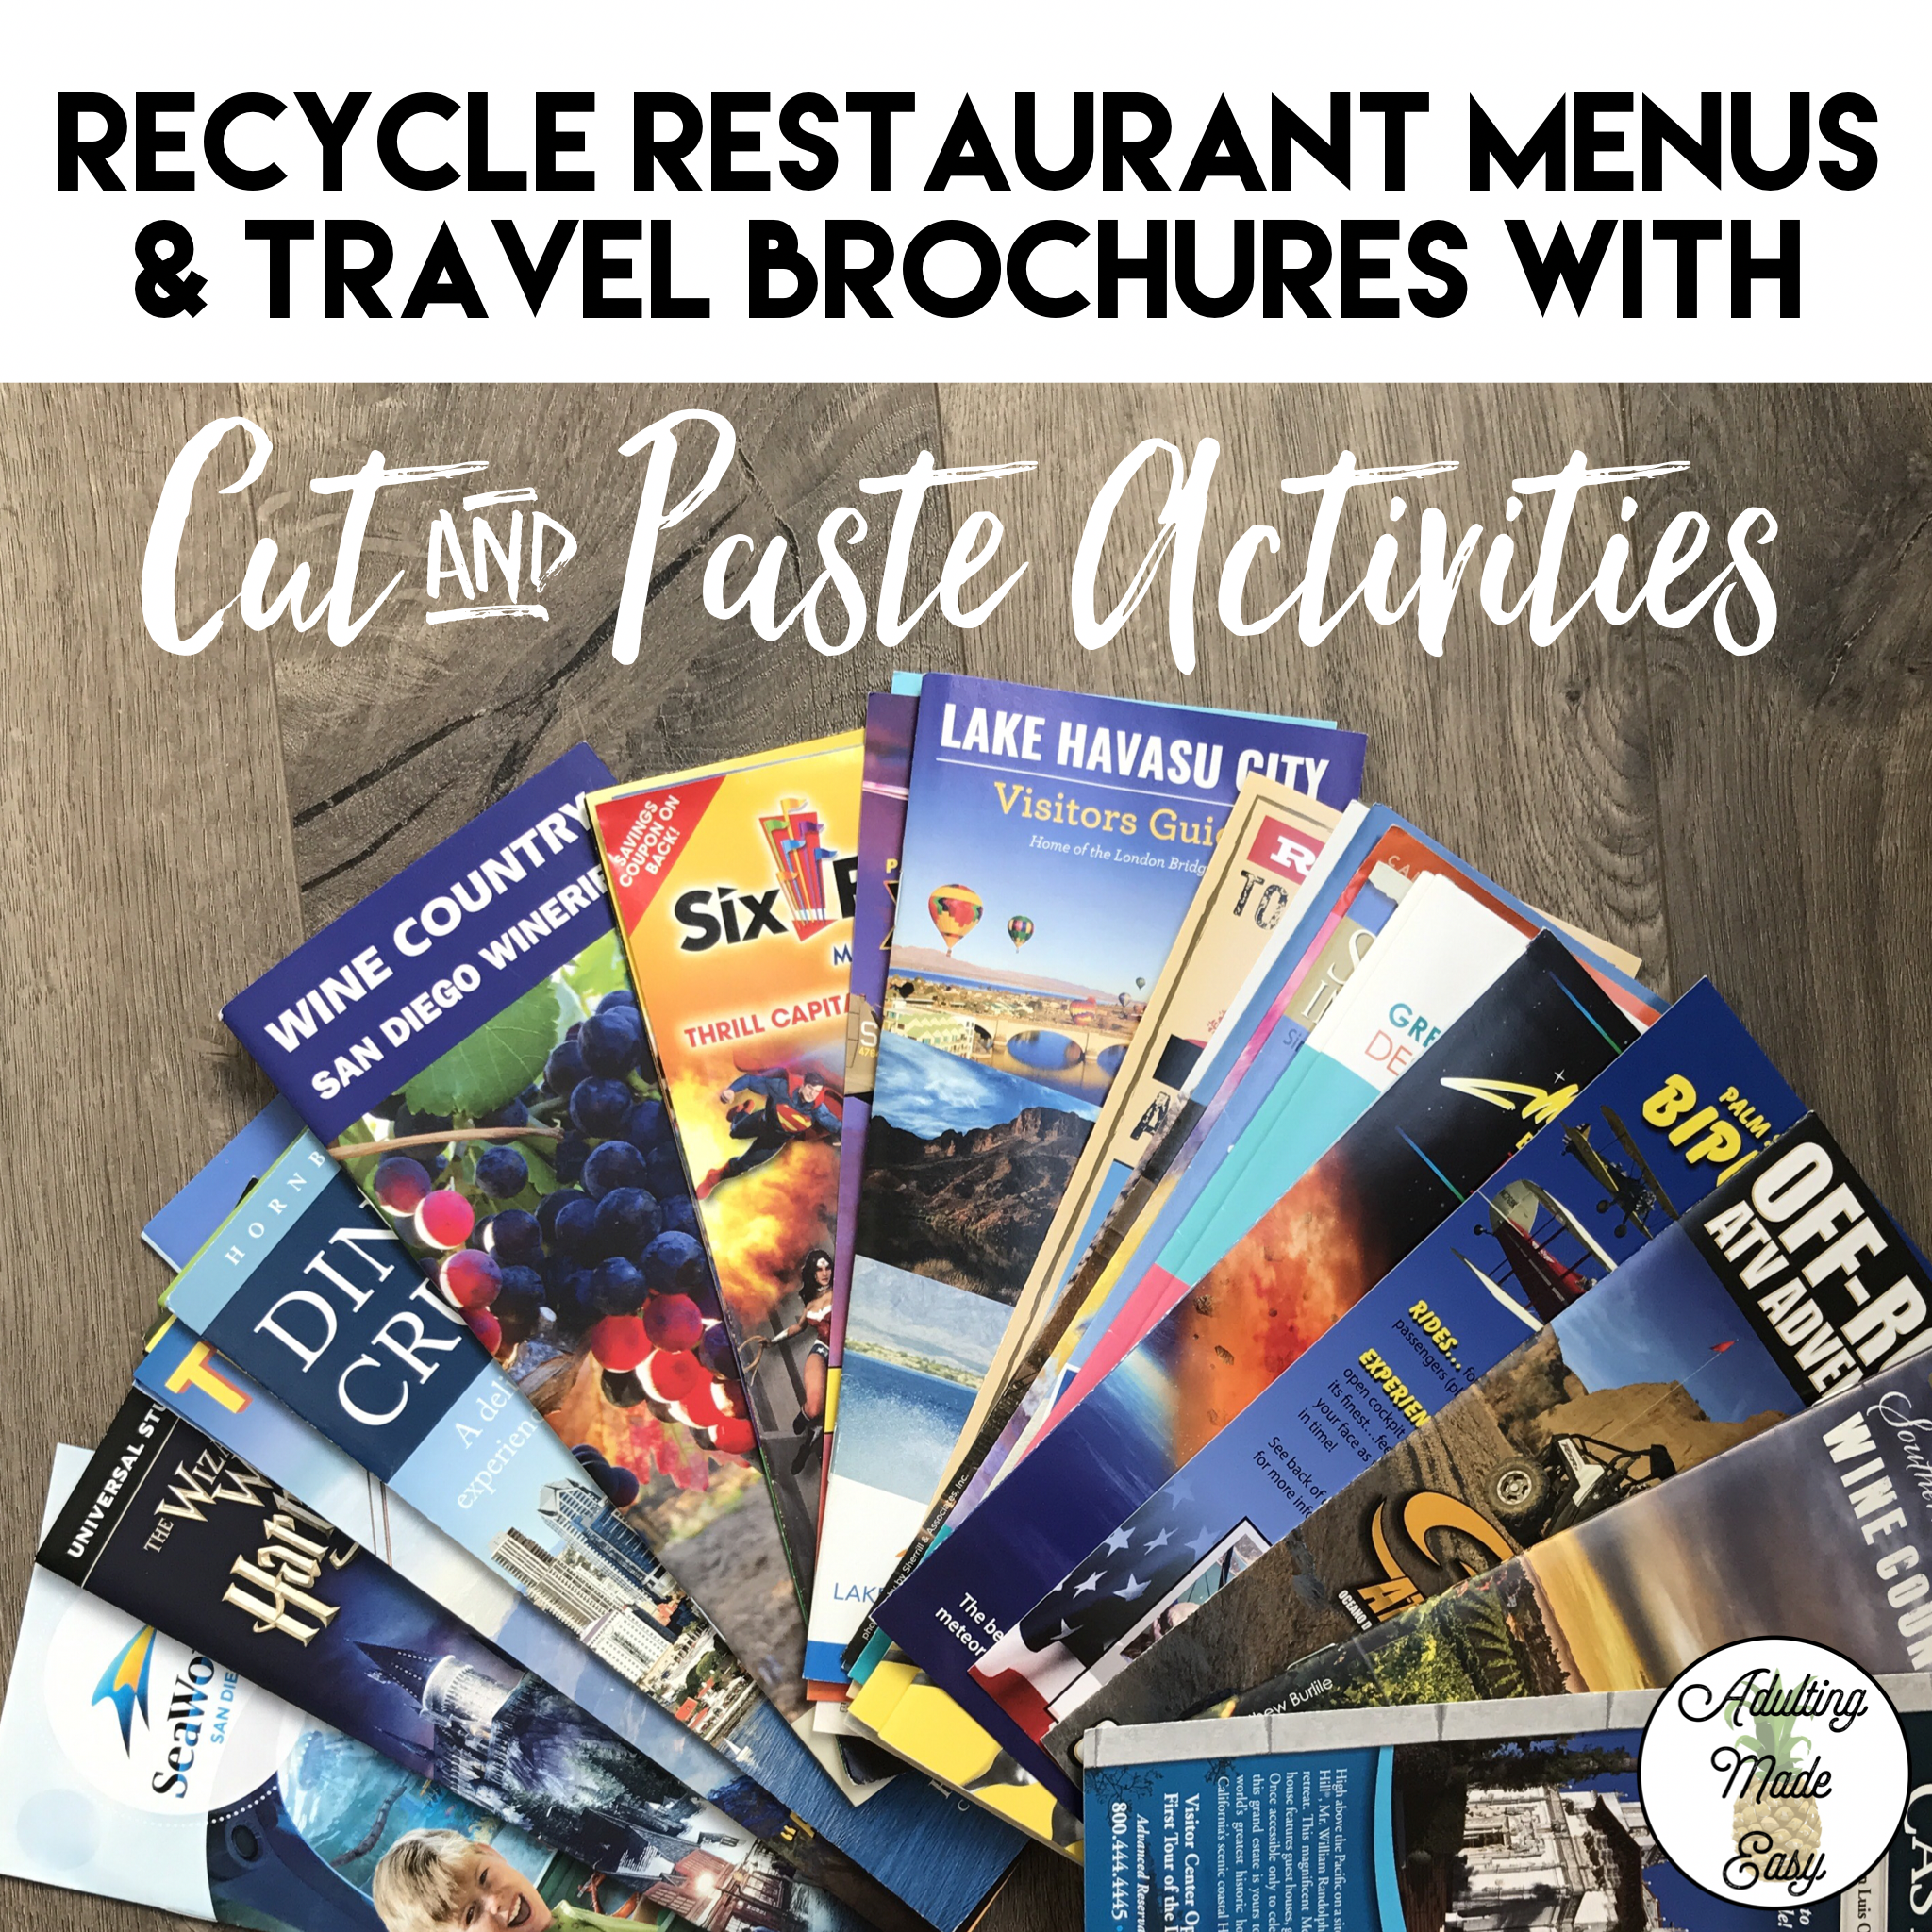 BLOG: Recycle restaurant menus & travel brochures with this cut and paste reading activity for special education life skills students.